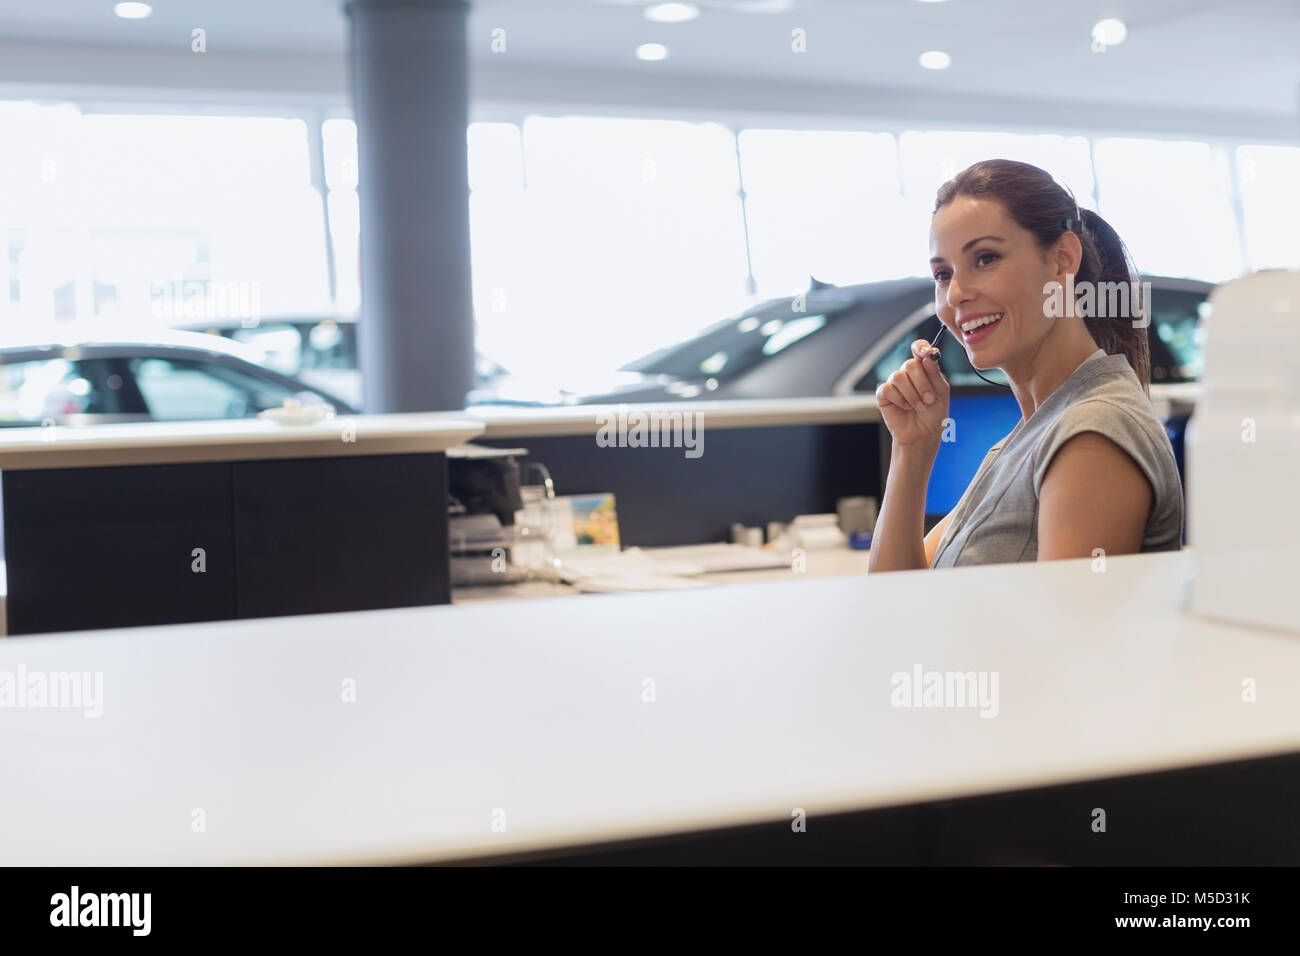 Smiling female receptionist talking on hands-free device telephone in car dealership showroom Stock Photo